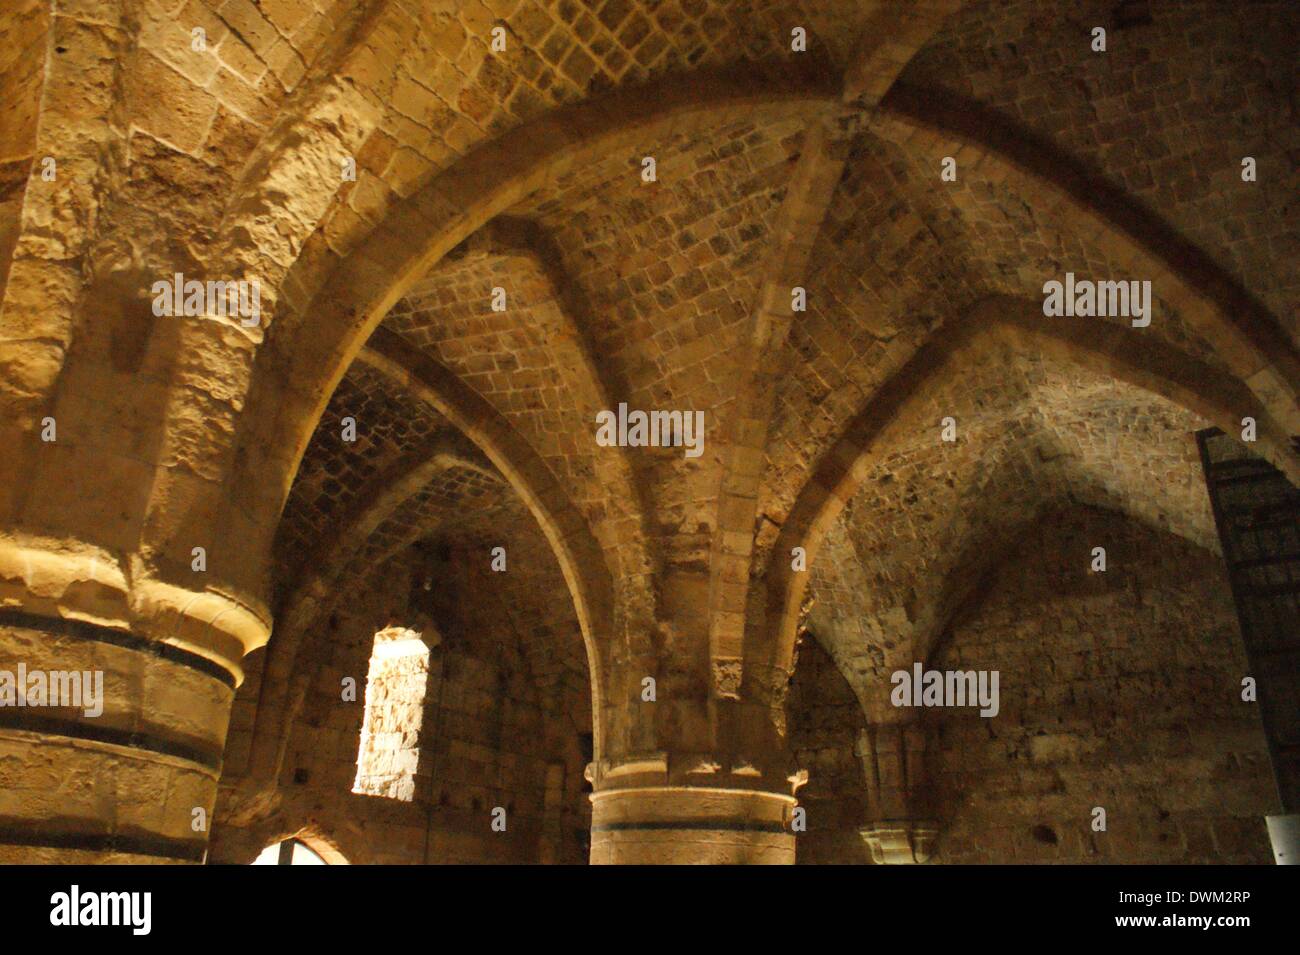 The castle of the crusaders, a foundation of the Knights Hospitaliers, represents an important historical monment. Overwhelming: the cross-vaults - April 2013. Stock Photo